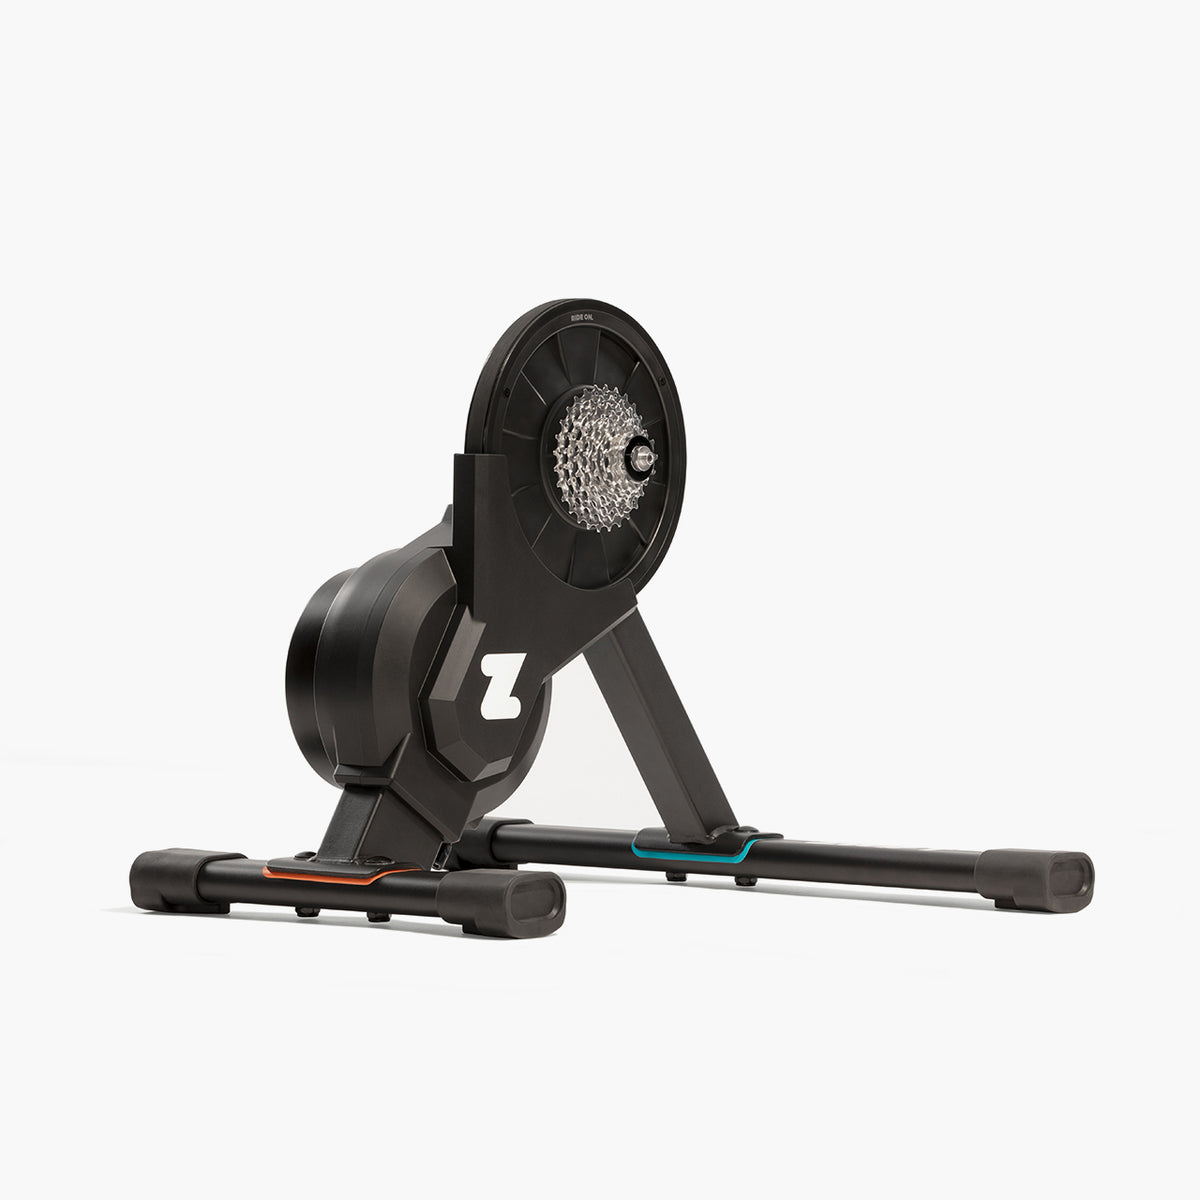 Zwift Hub Smart Turbo Trainer with 9 speed cassette